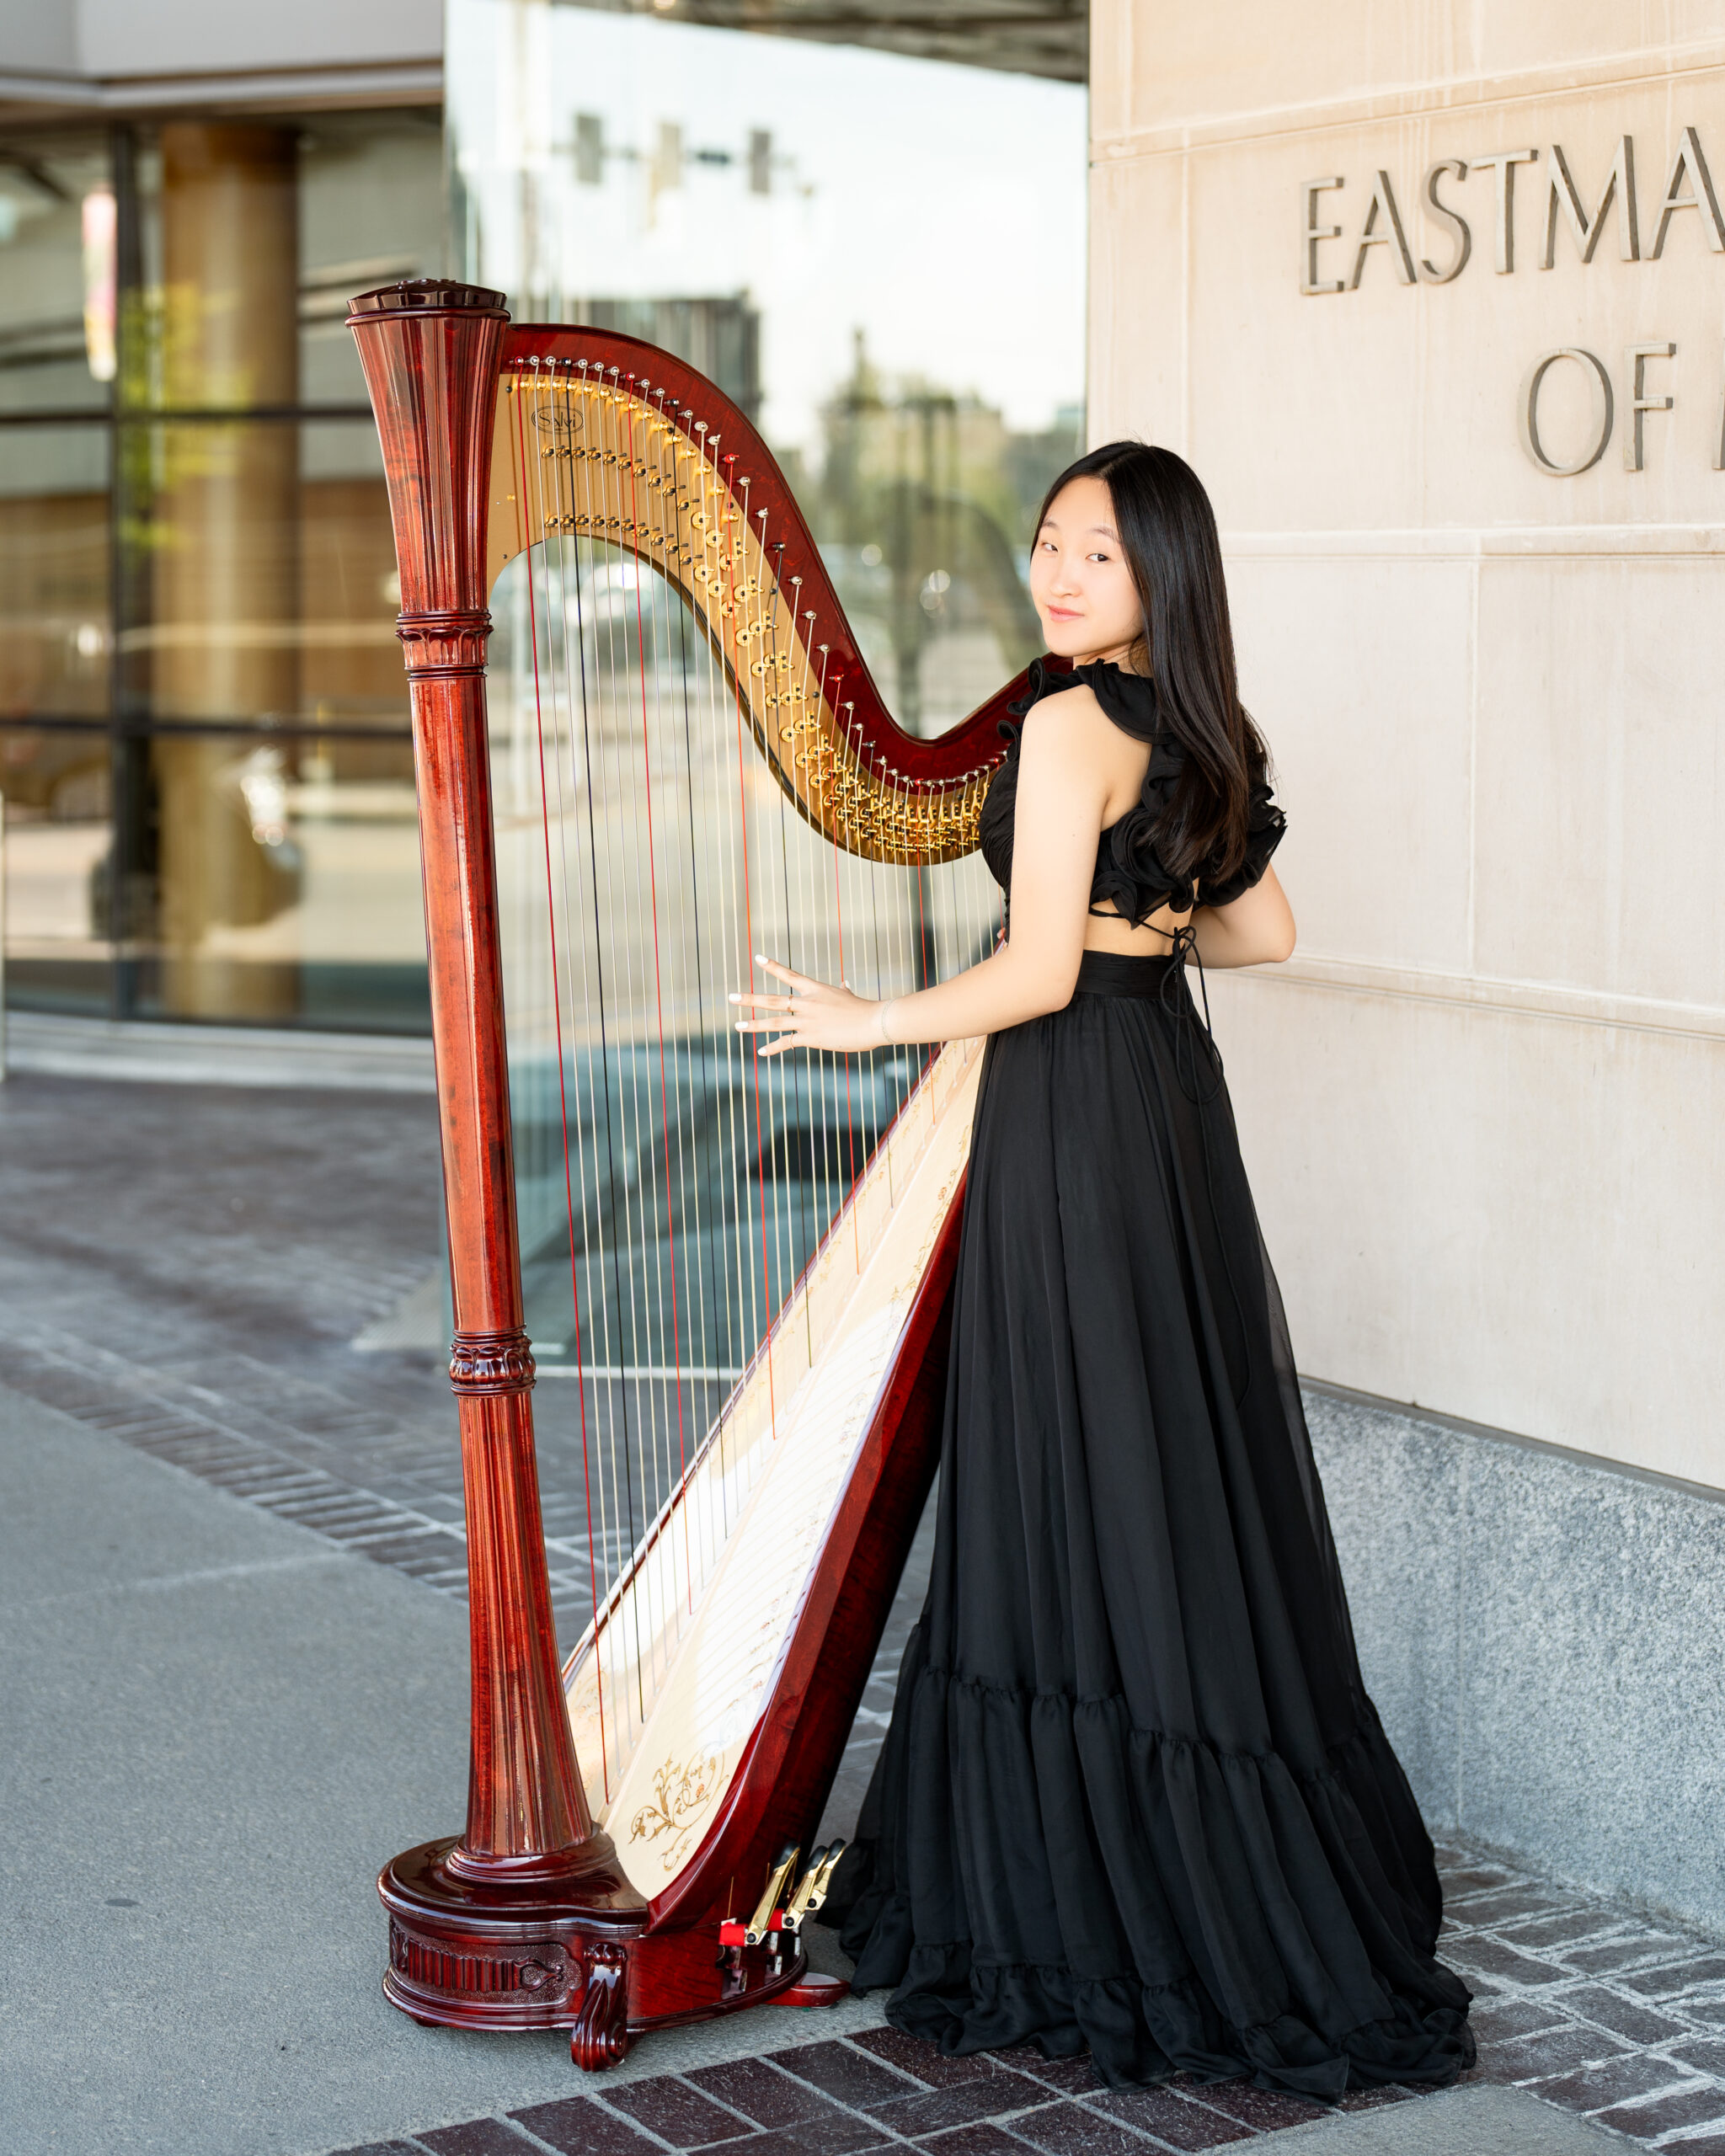 These Rochester senior pictures feature a high school senior and her harp. She is wearing a long, black dress with a large harp.